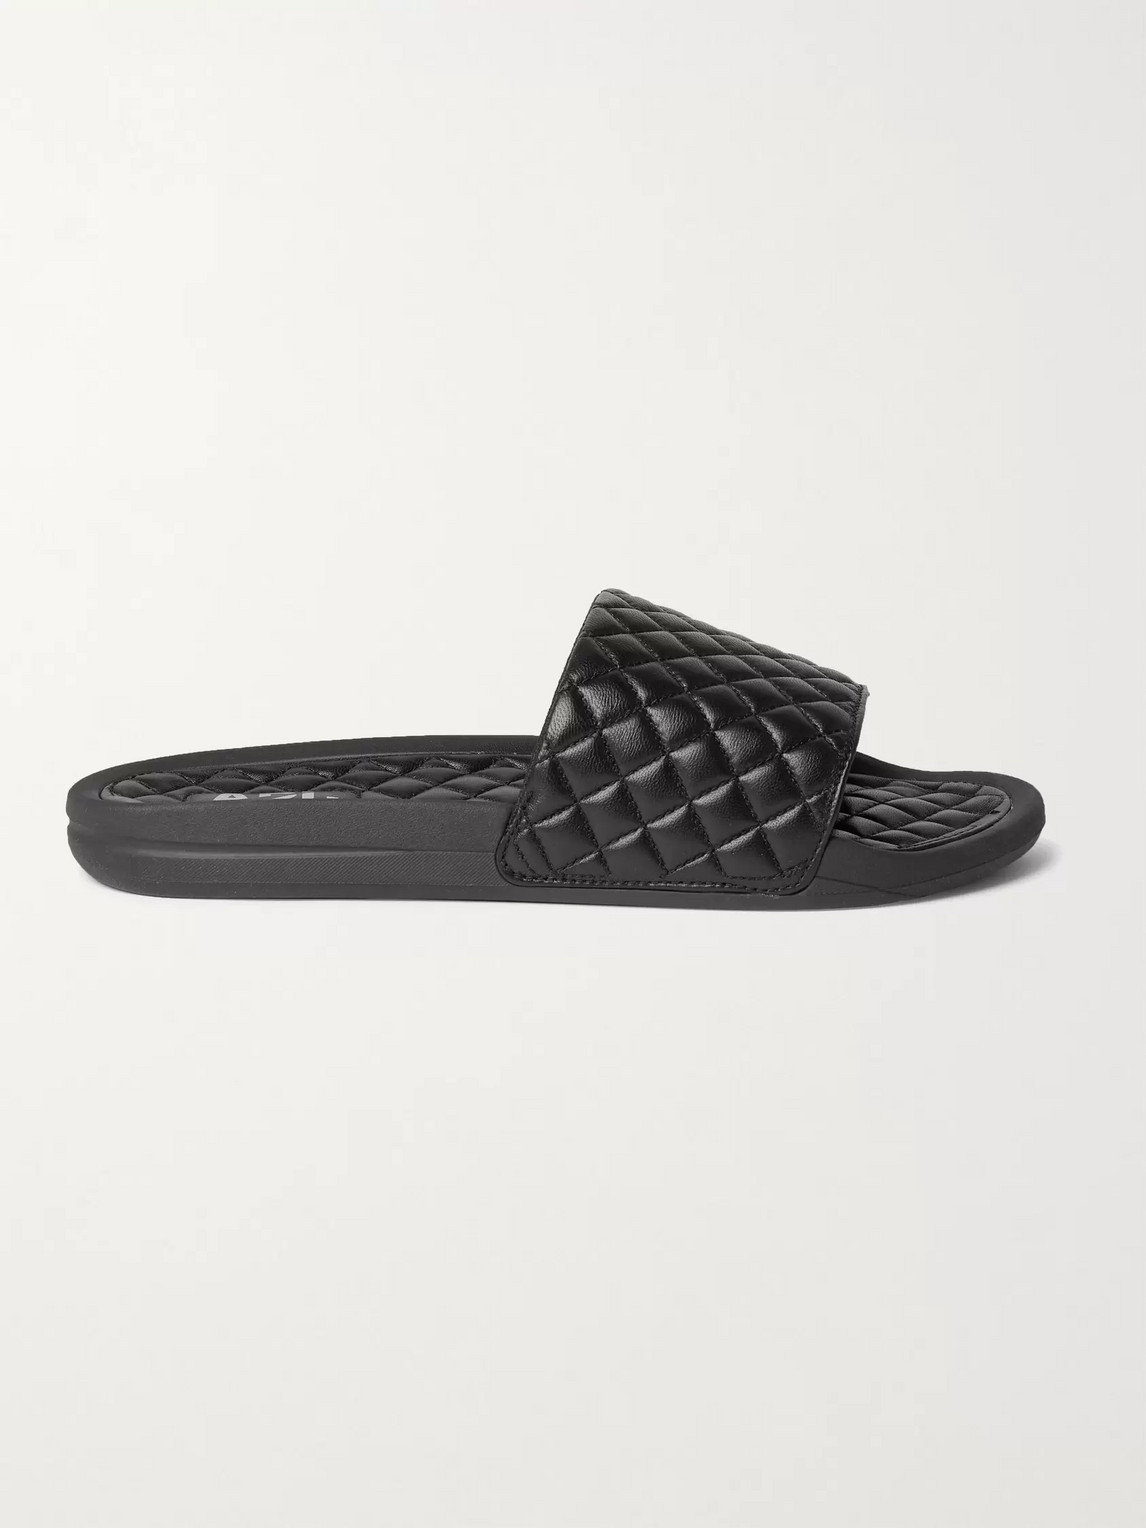 APL ATHLETIC PROPULSION LABS LUSSO QUILTED LEATHER SLIDES